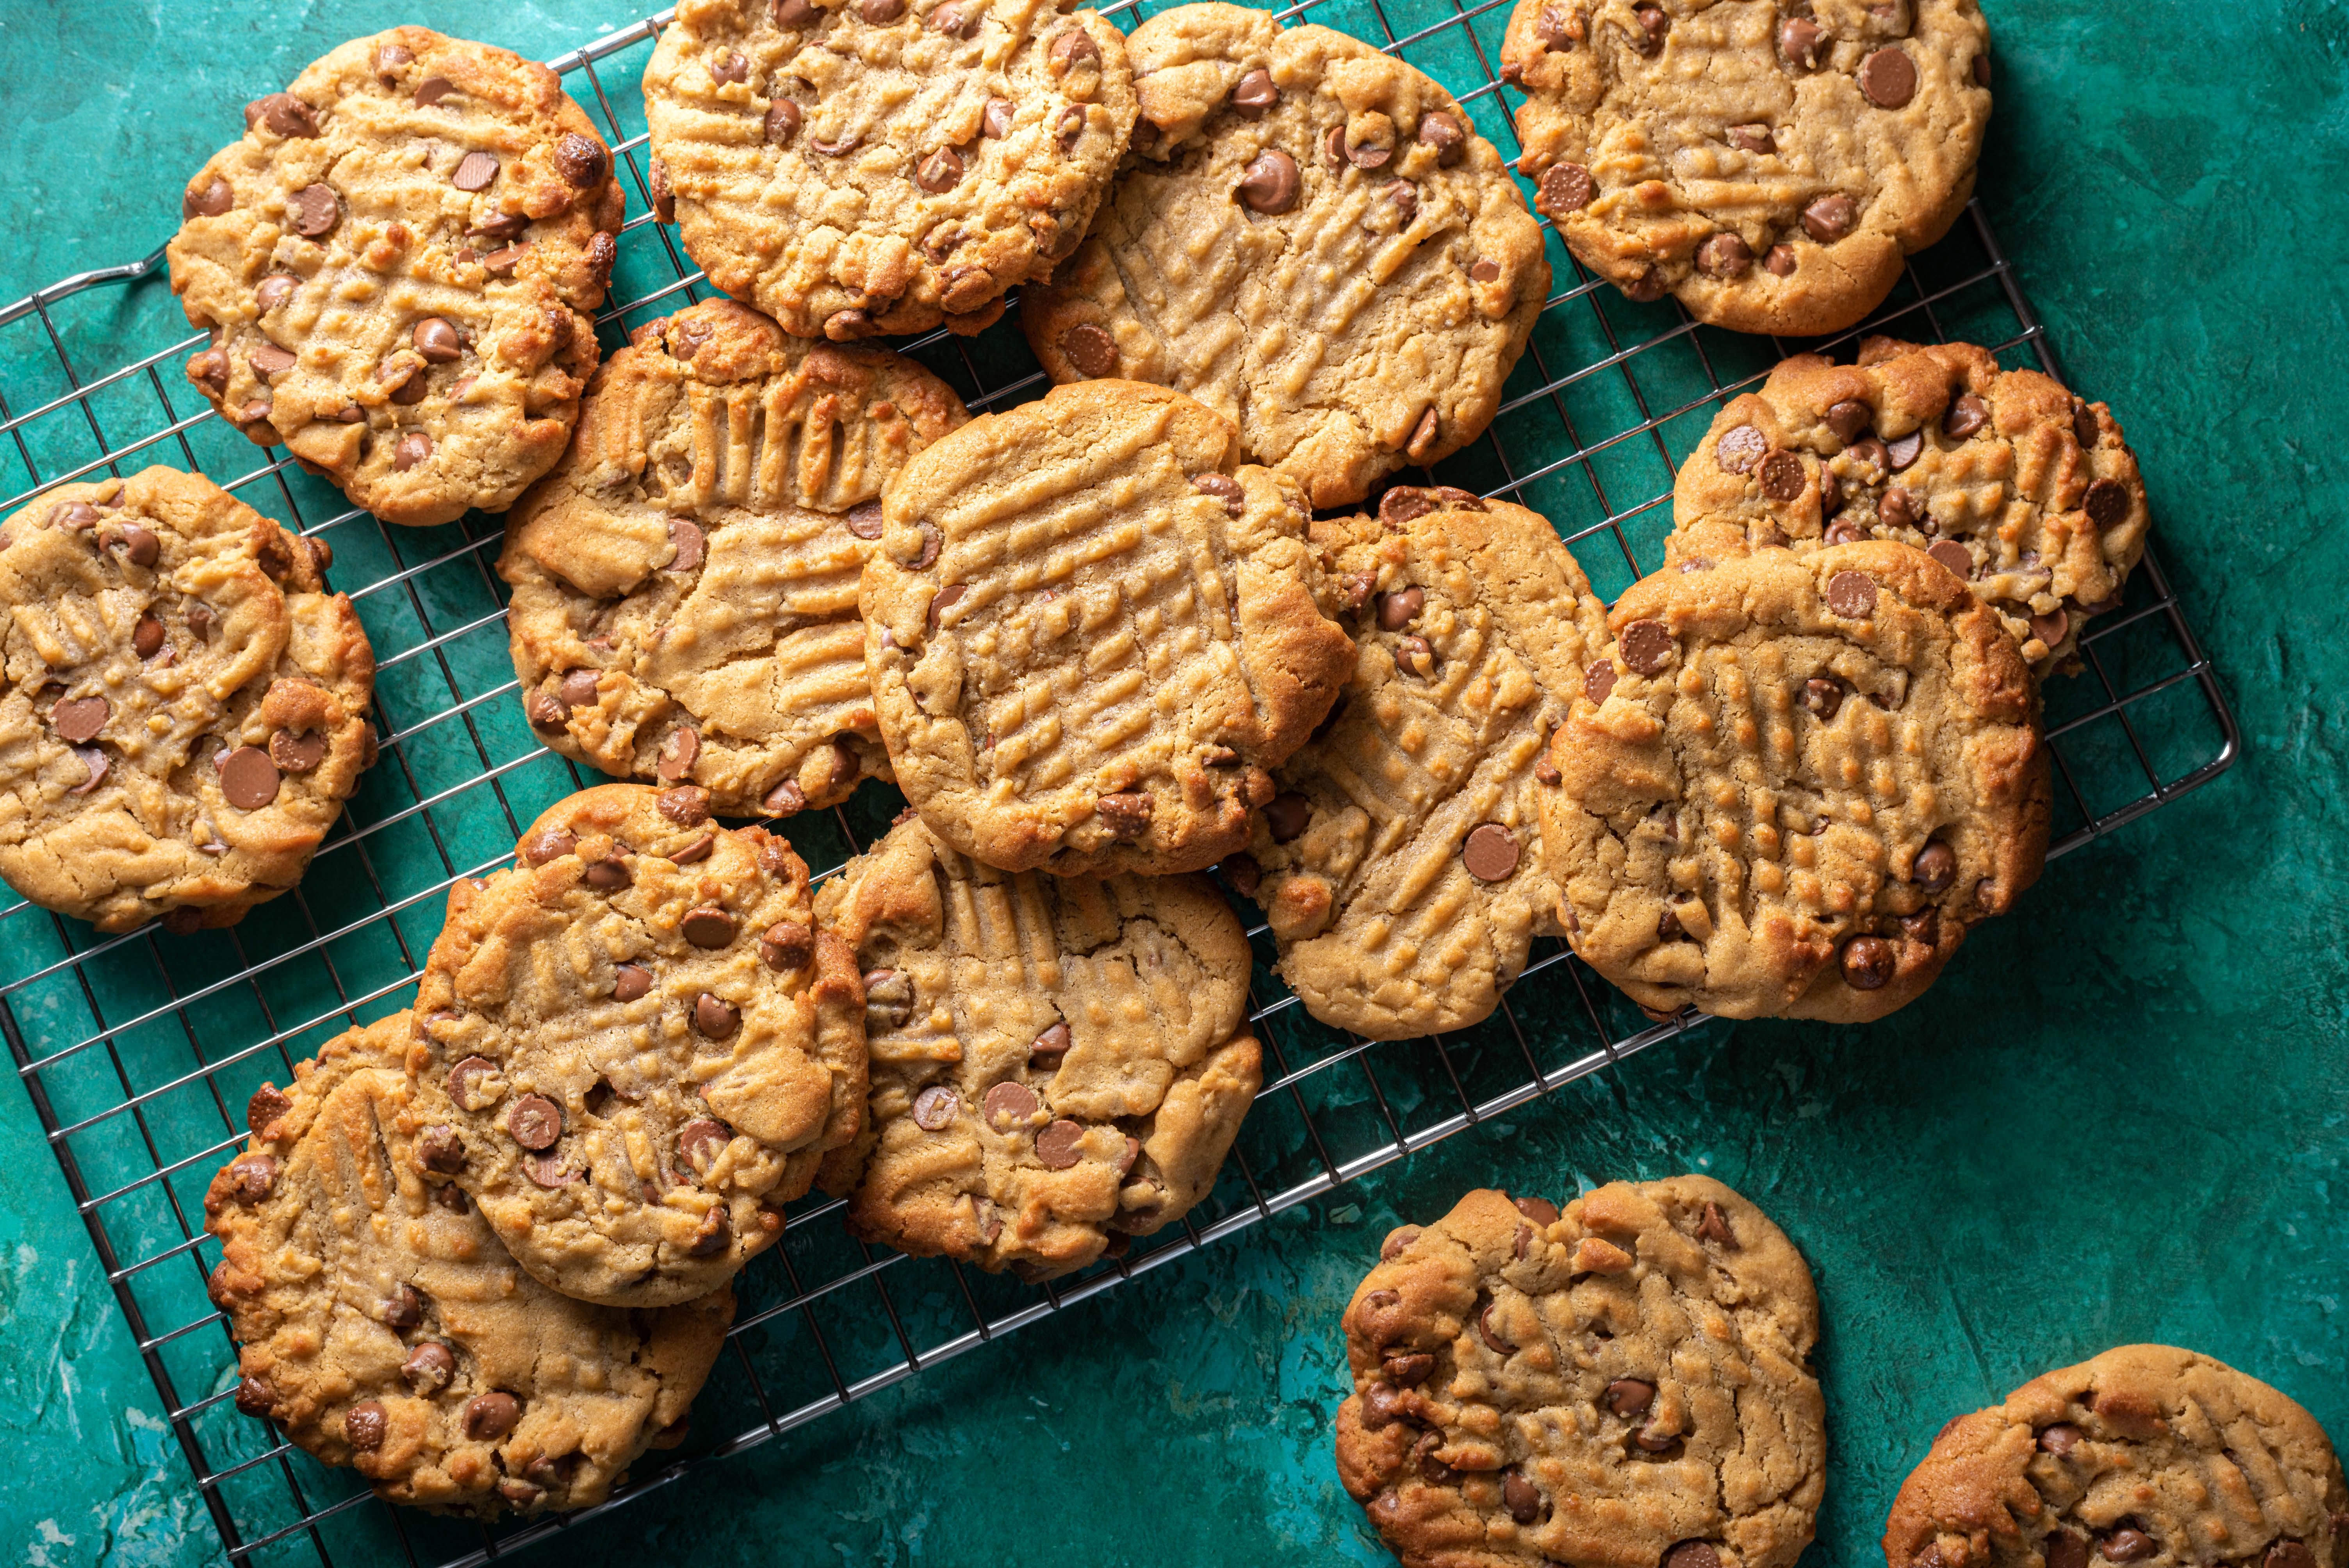 Soft Peanut Butter Chocolate Chip Cookies